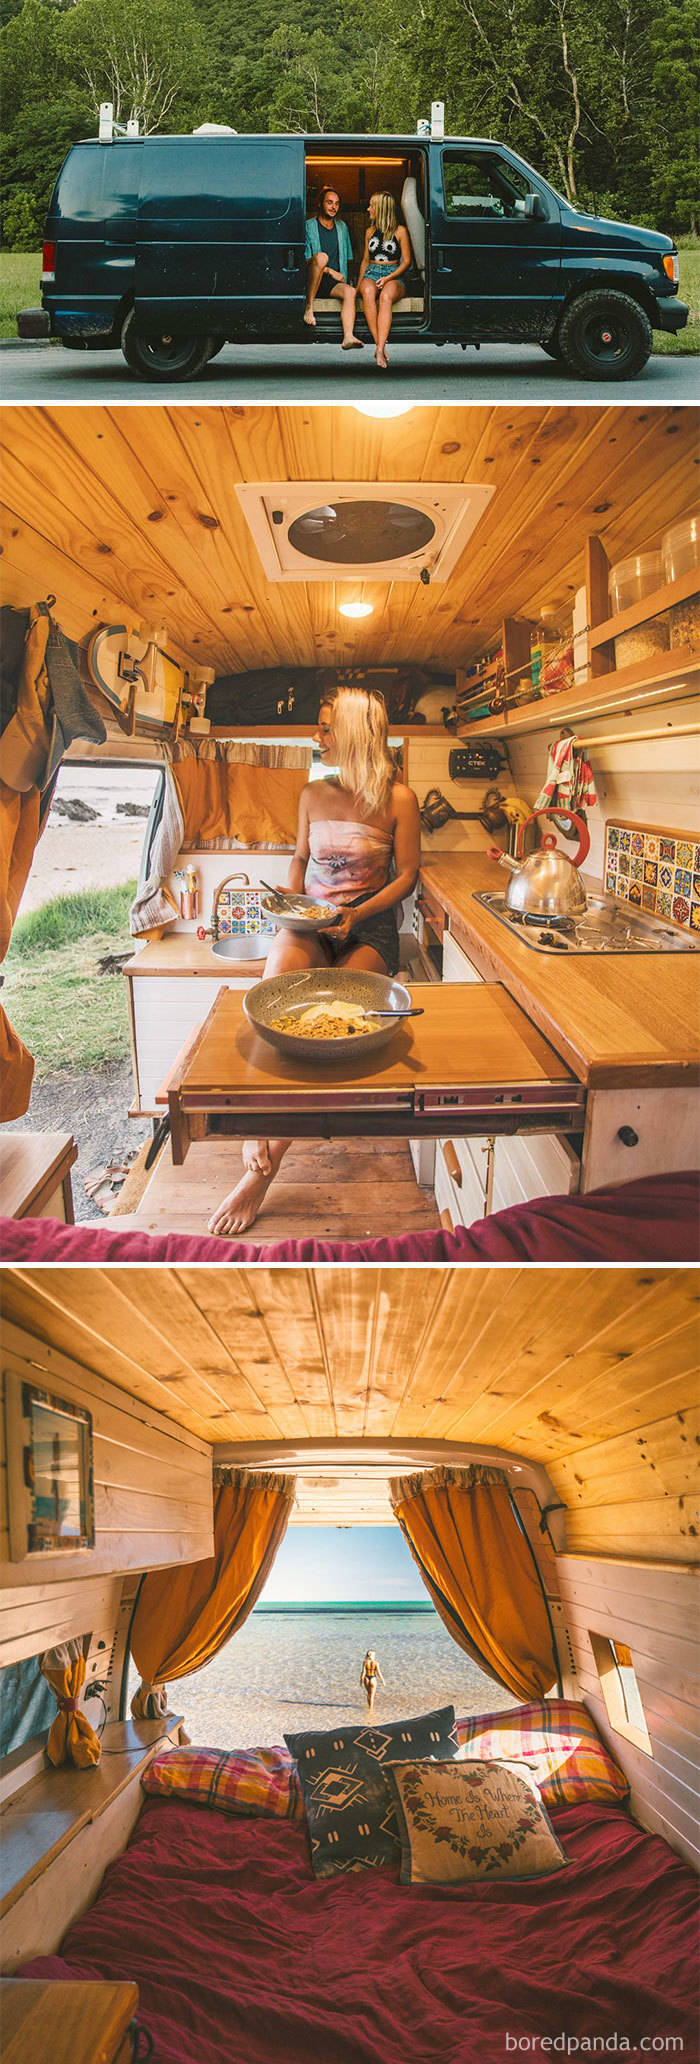 How To Make A Mobile House Out Of Your Van